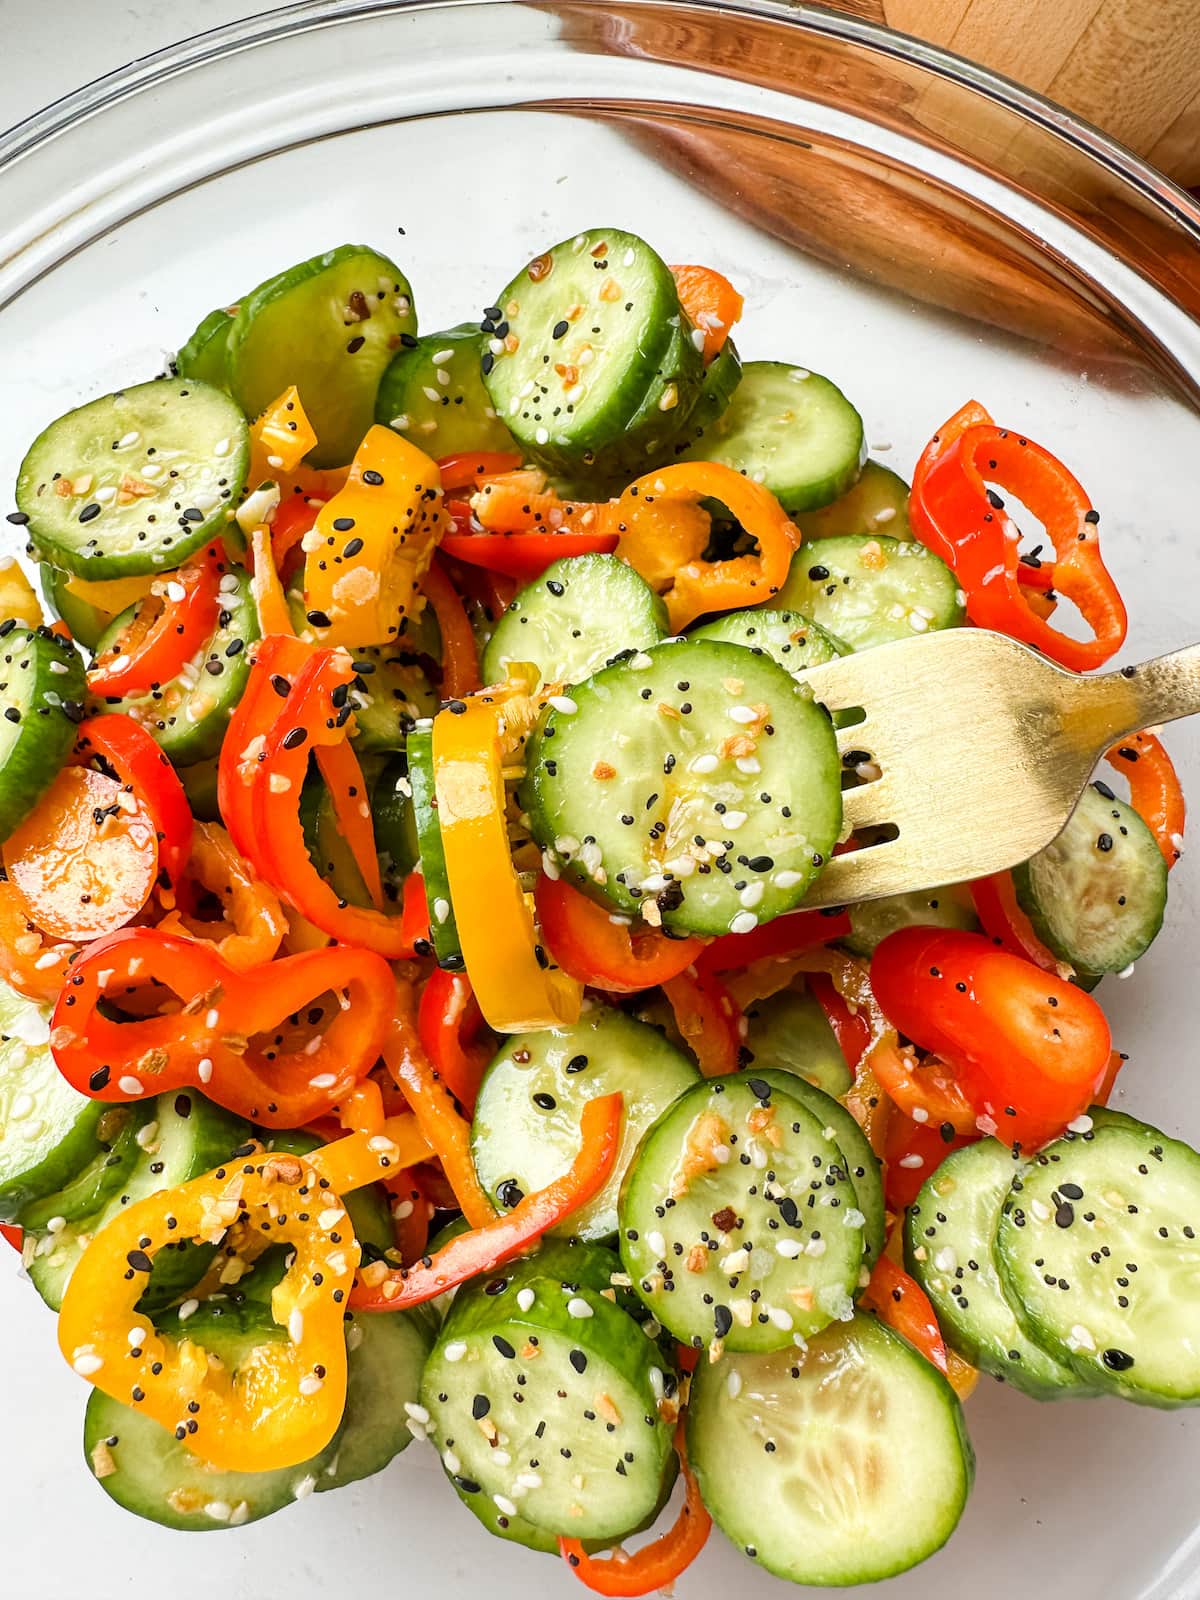 Cucumber and bell pepper salad in a clear bowl with a golden fork.